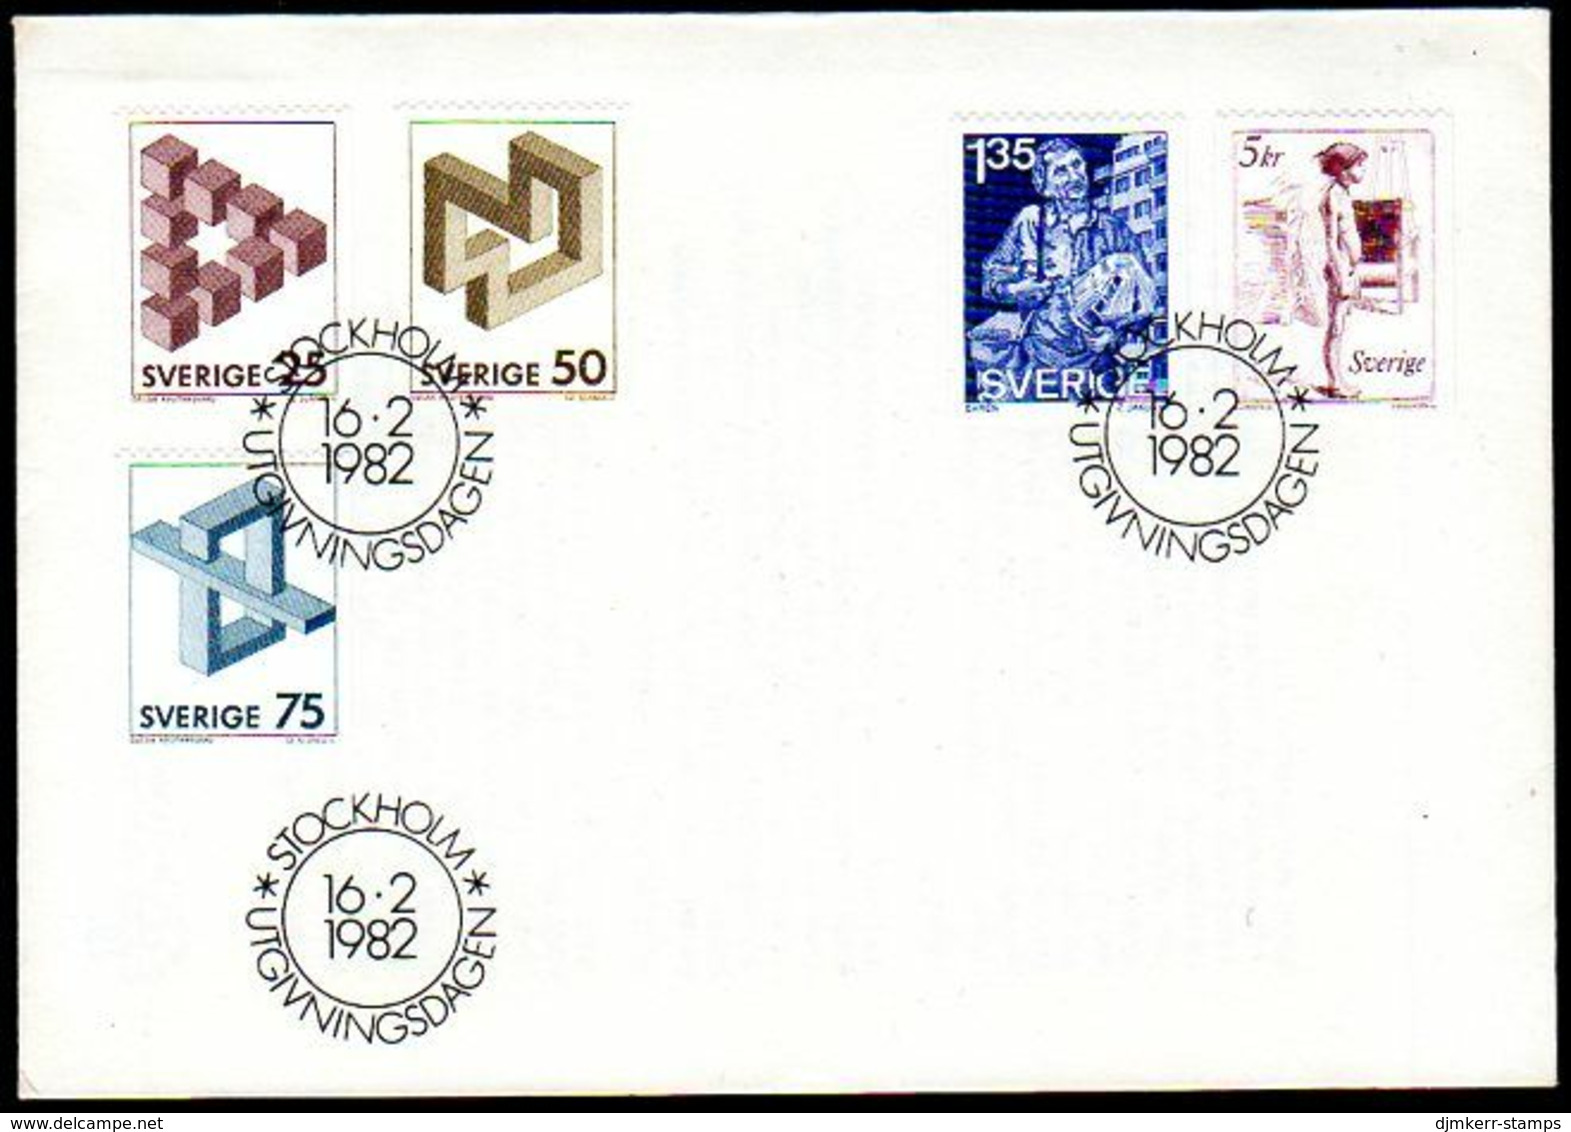 SWEDEN 1982 Definitive Stamps: Various Topics  FDC. Michel 1182-86 - FDC